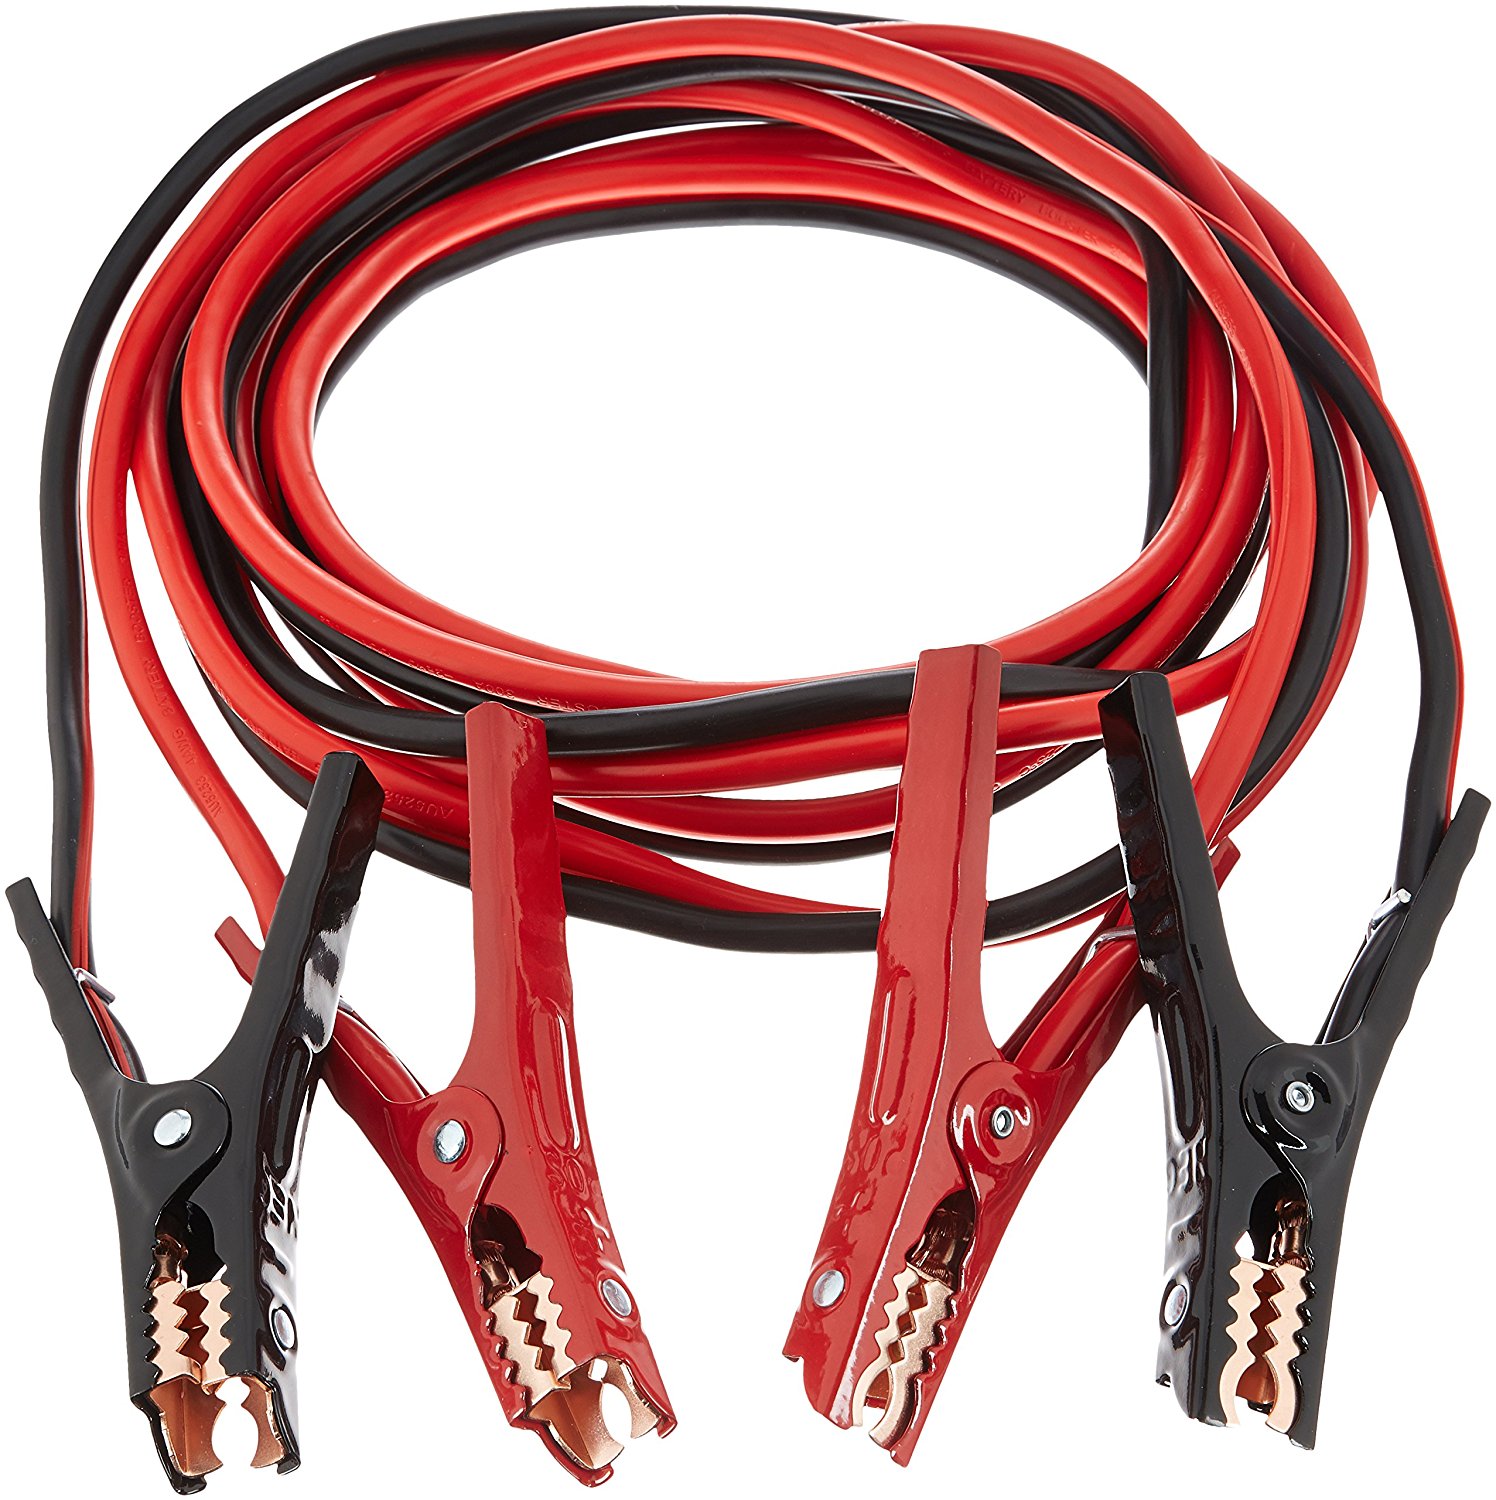 AmazonBasics 20-foot 4-gauge jumper cables for $11.38